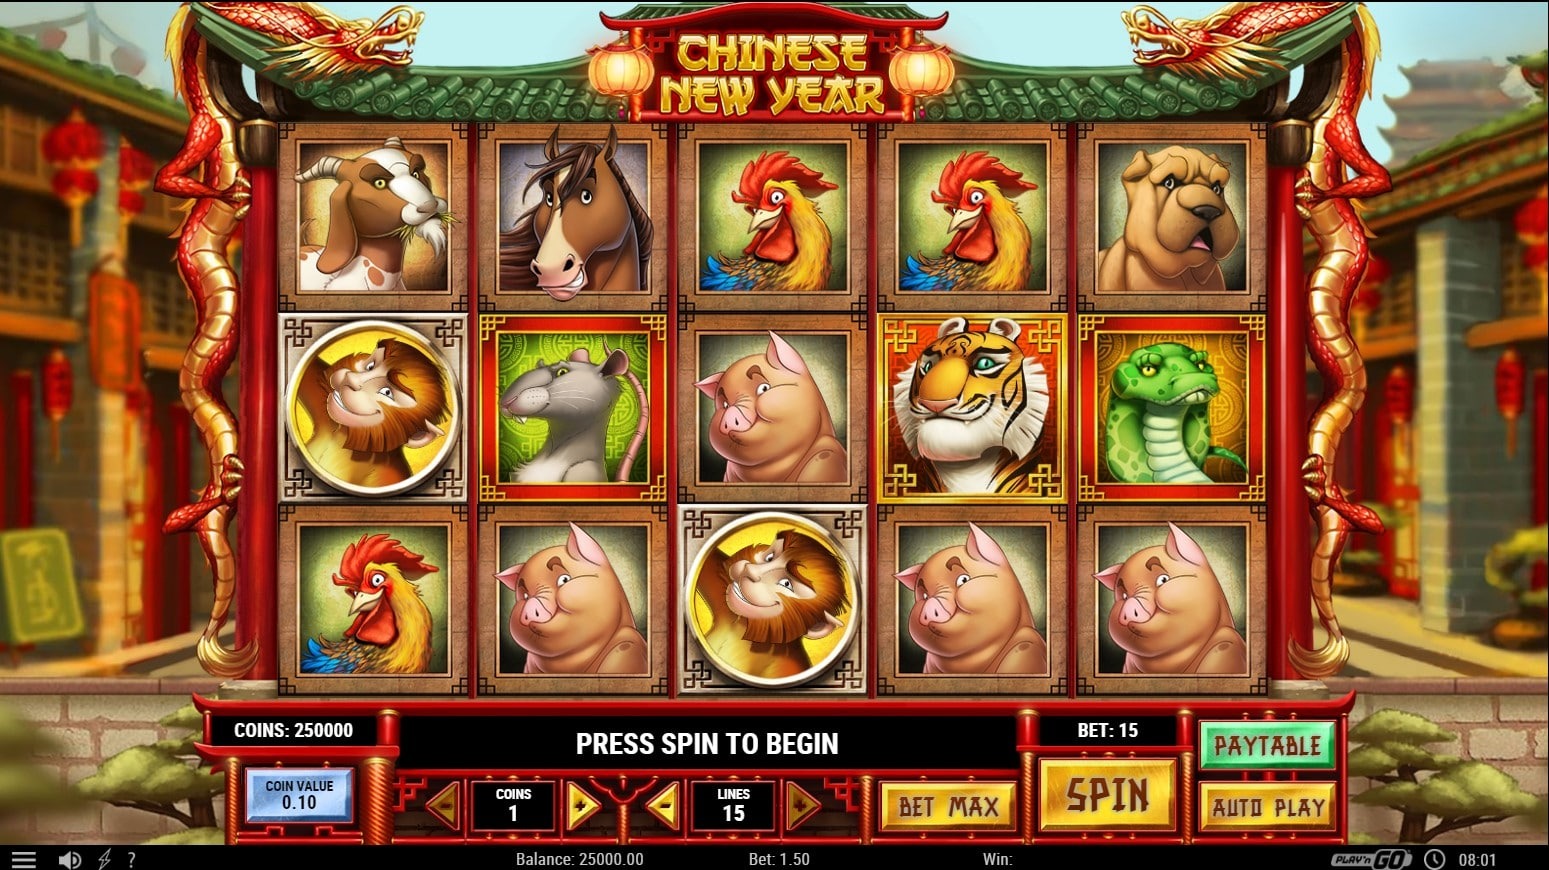 Chinese featured themed slot